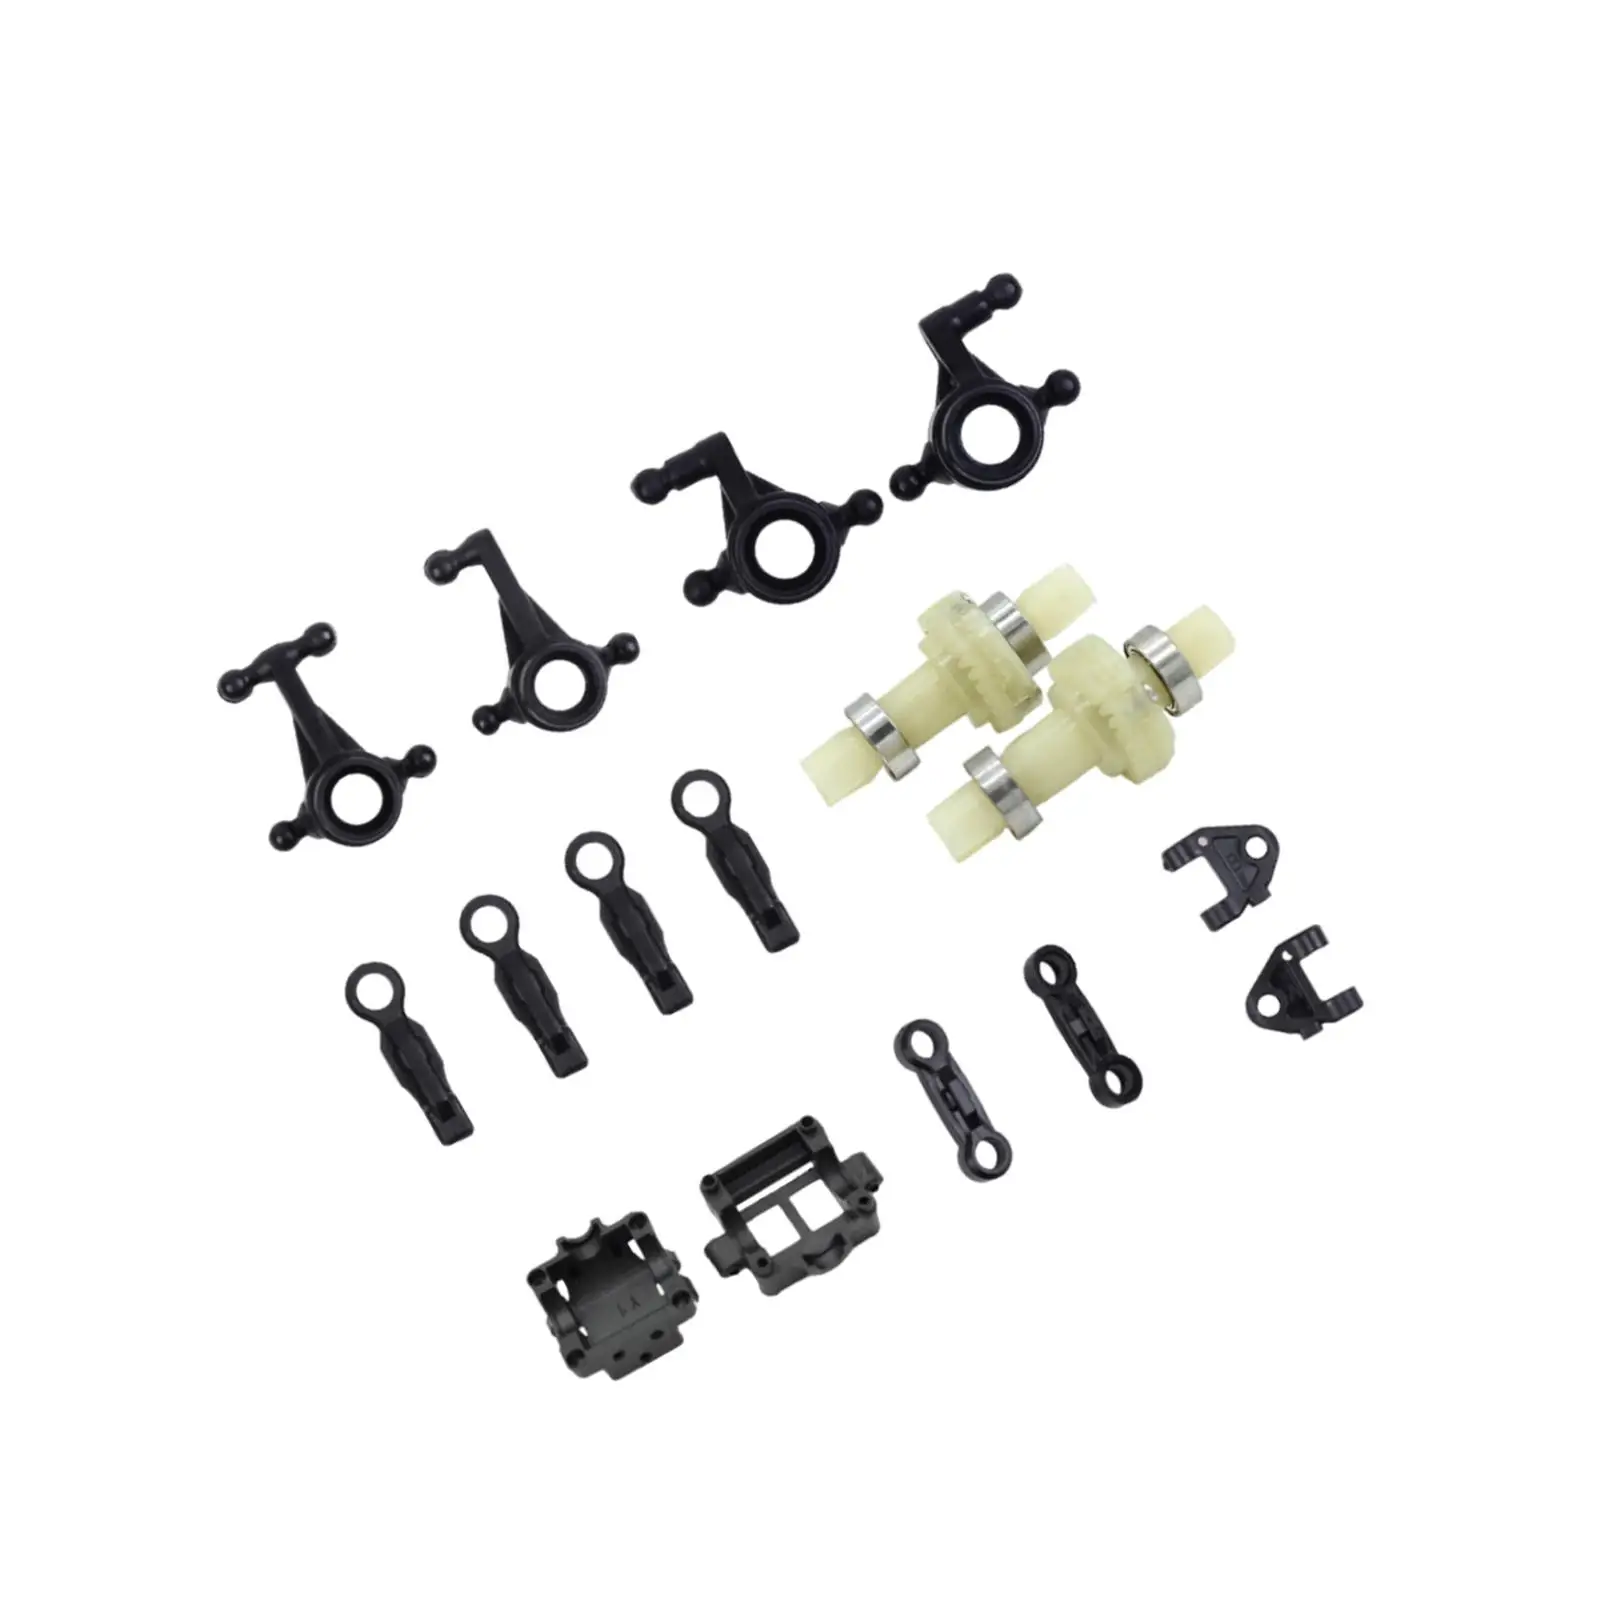 RC Metal Complete Kit Upper and Lower Arm Rear Ball Tie Rod Differential Box for Wltoys 284161 Trucks 1/28 RC Hobby Car Vehicles